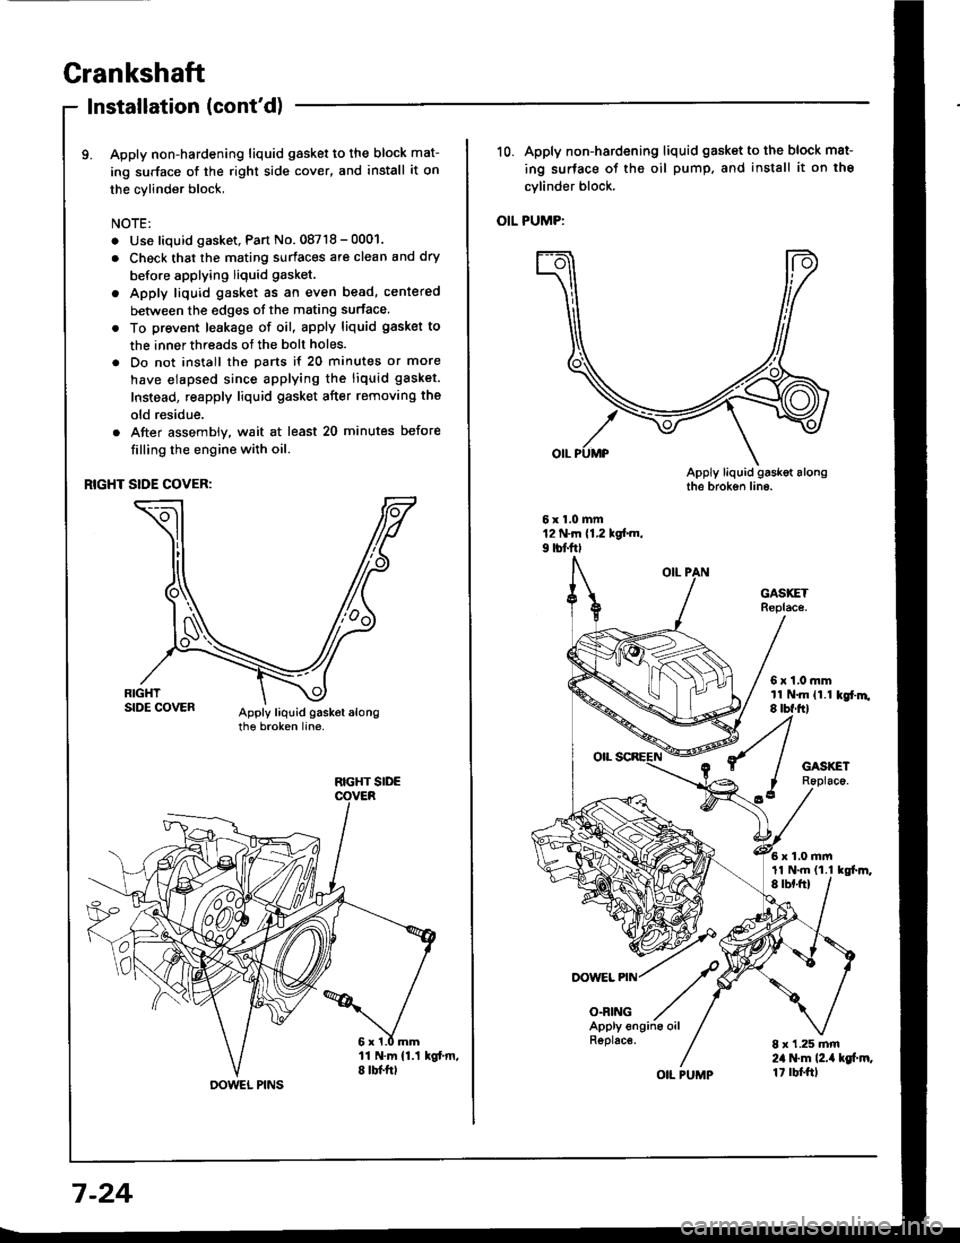 HONDA INTEGRA 1994 4.G Workshop Manual Grankshaft
Installation (contd)
9. Apply non-hardening liquid gasket to the block mat-
ing surface of the right side cover, and install it on
the cylinder block,
NOTE:
. Use liquid gasket, Part No. 0